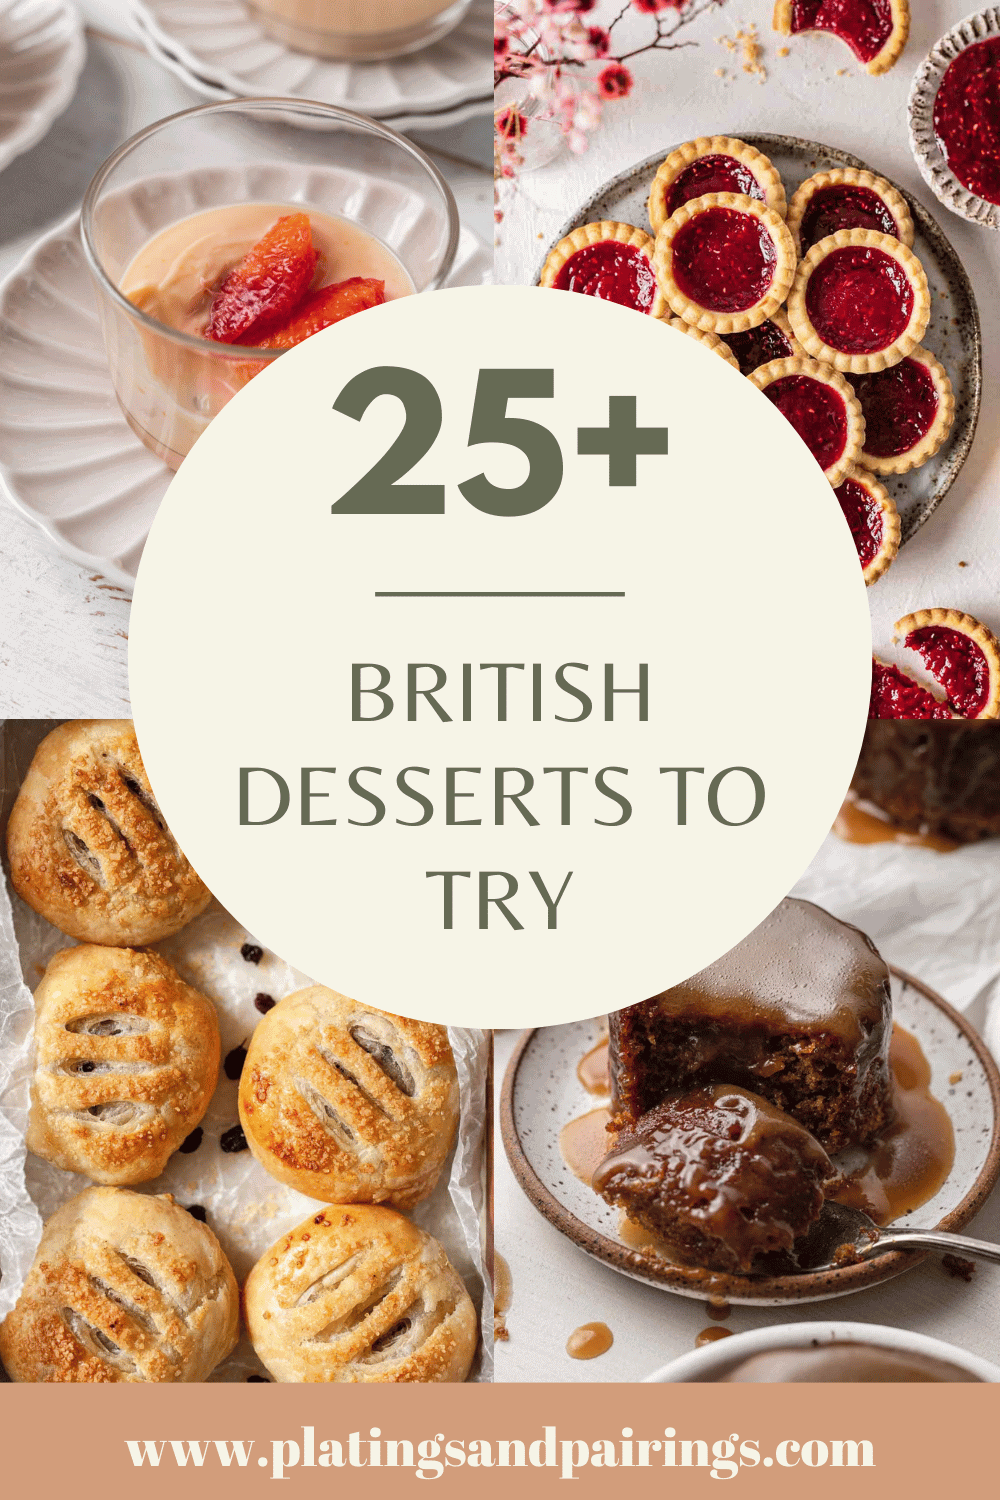 Collage of british desserts with text overlay.